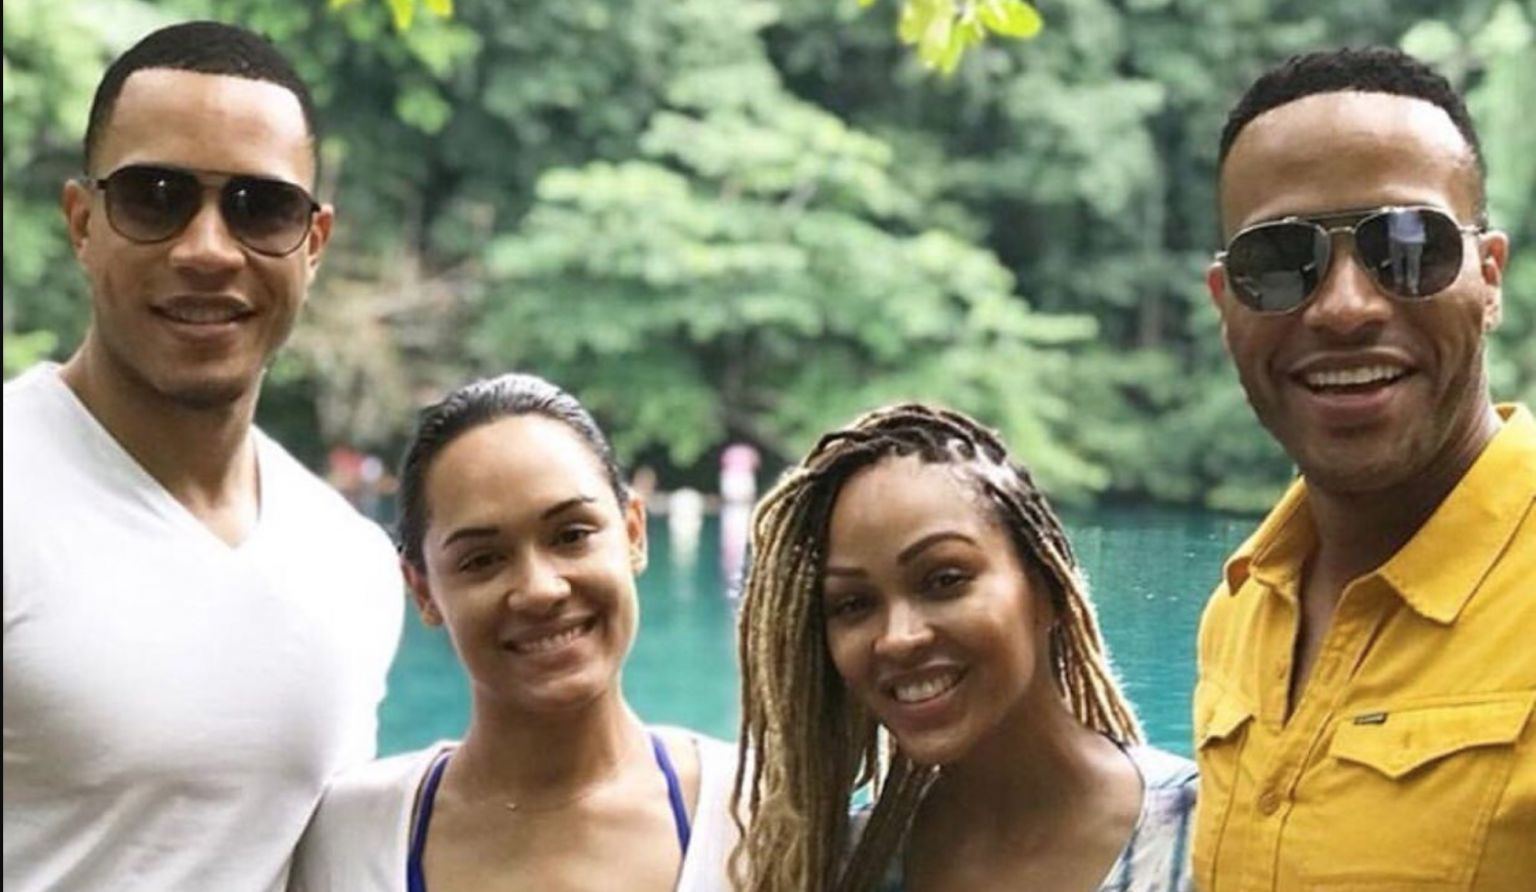 How Sweet! Meagan Good And Grace Byers Planned The Cutest Double Date For Their Husbands